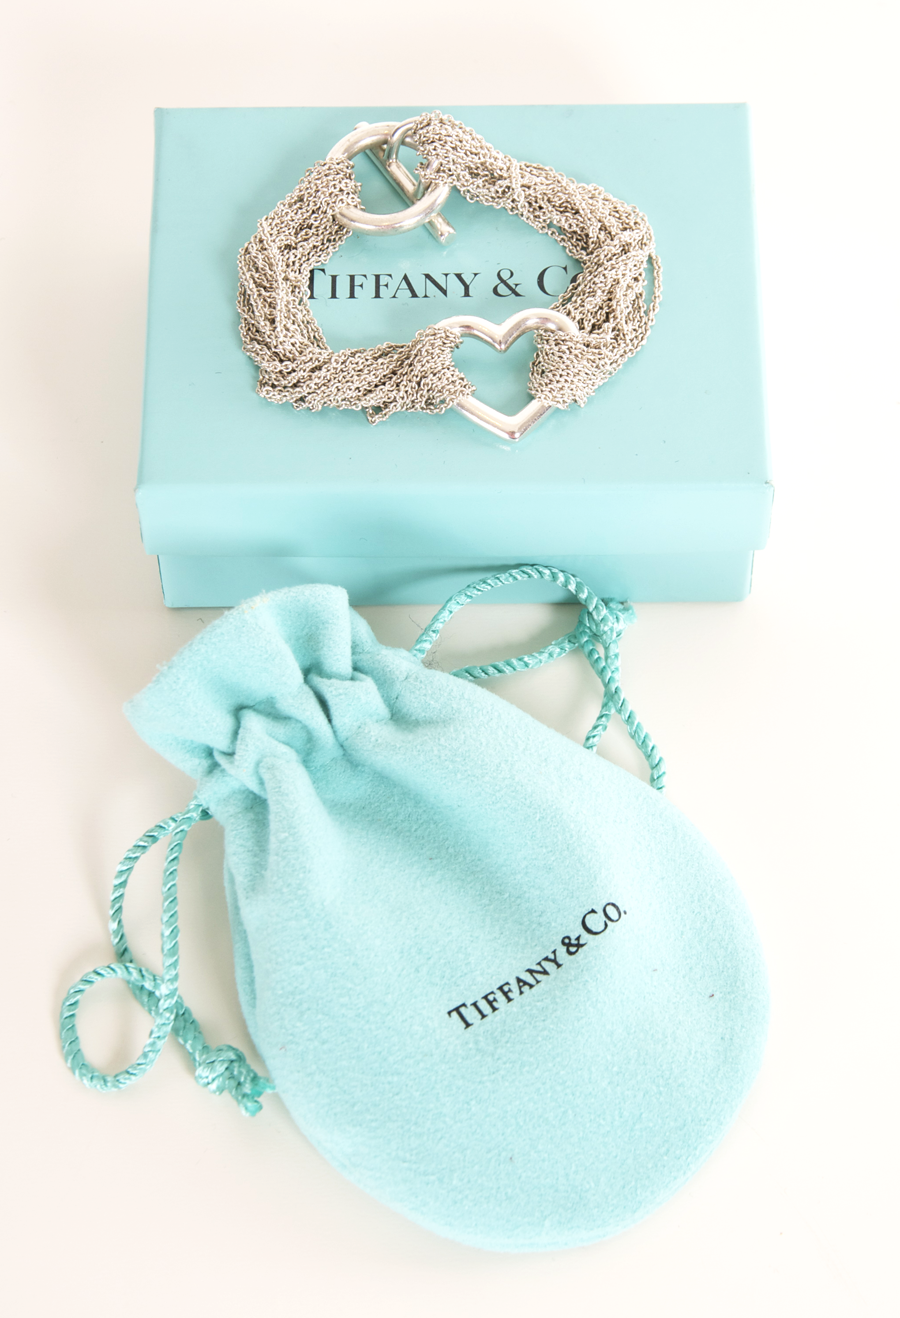 Tiffany Blue is so iconic!